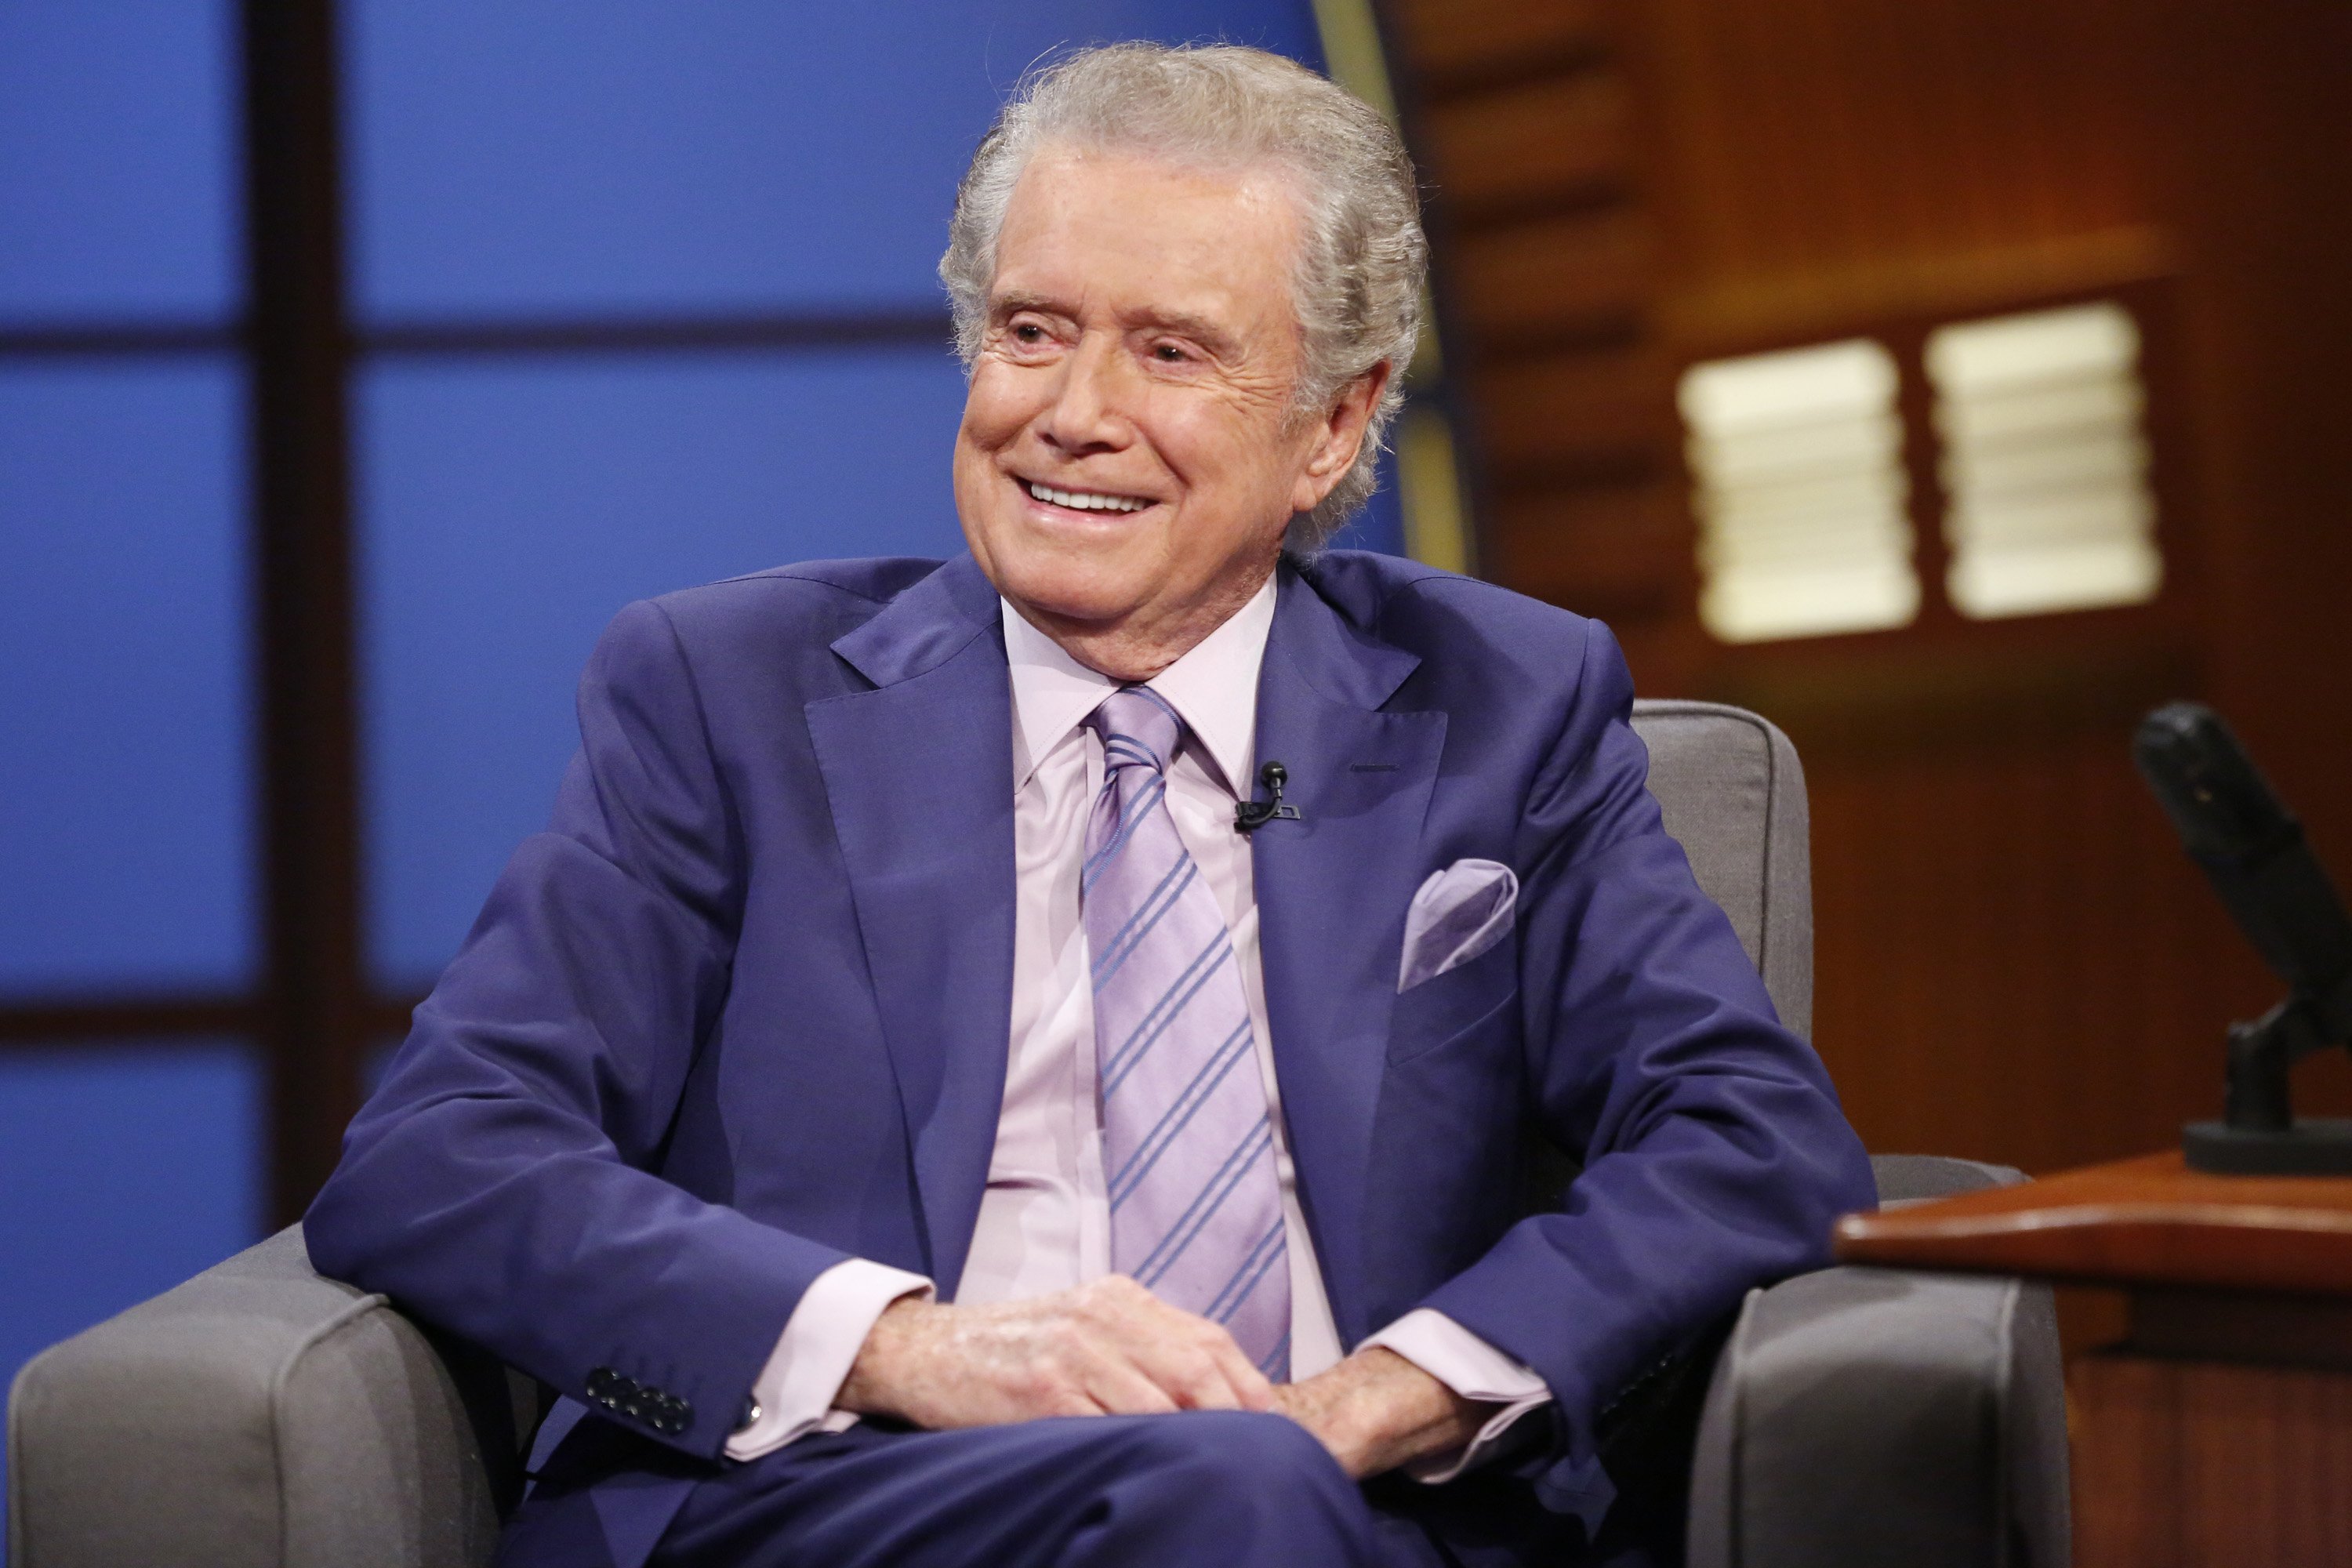 Regis Philbin during an interview on "Late Night with Seth Meyers," 2014. | Photo: Getty Images